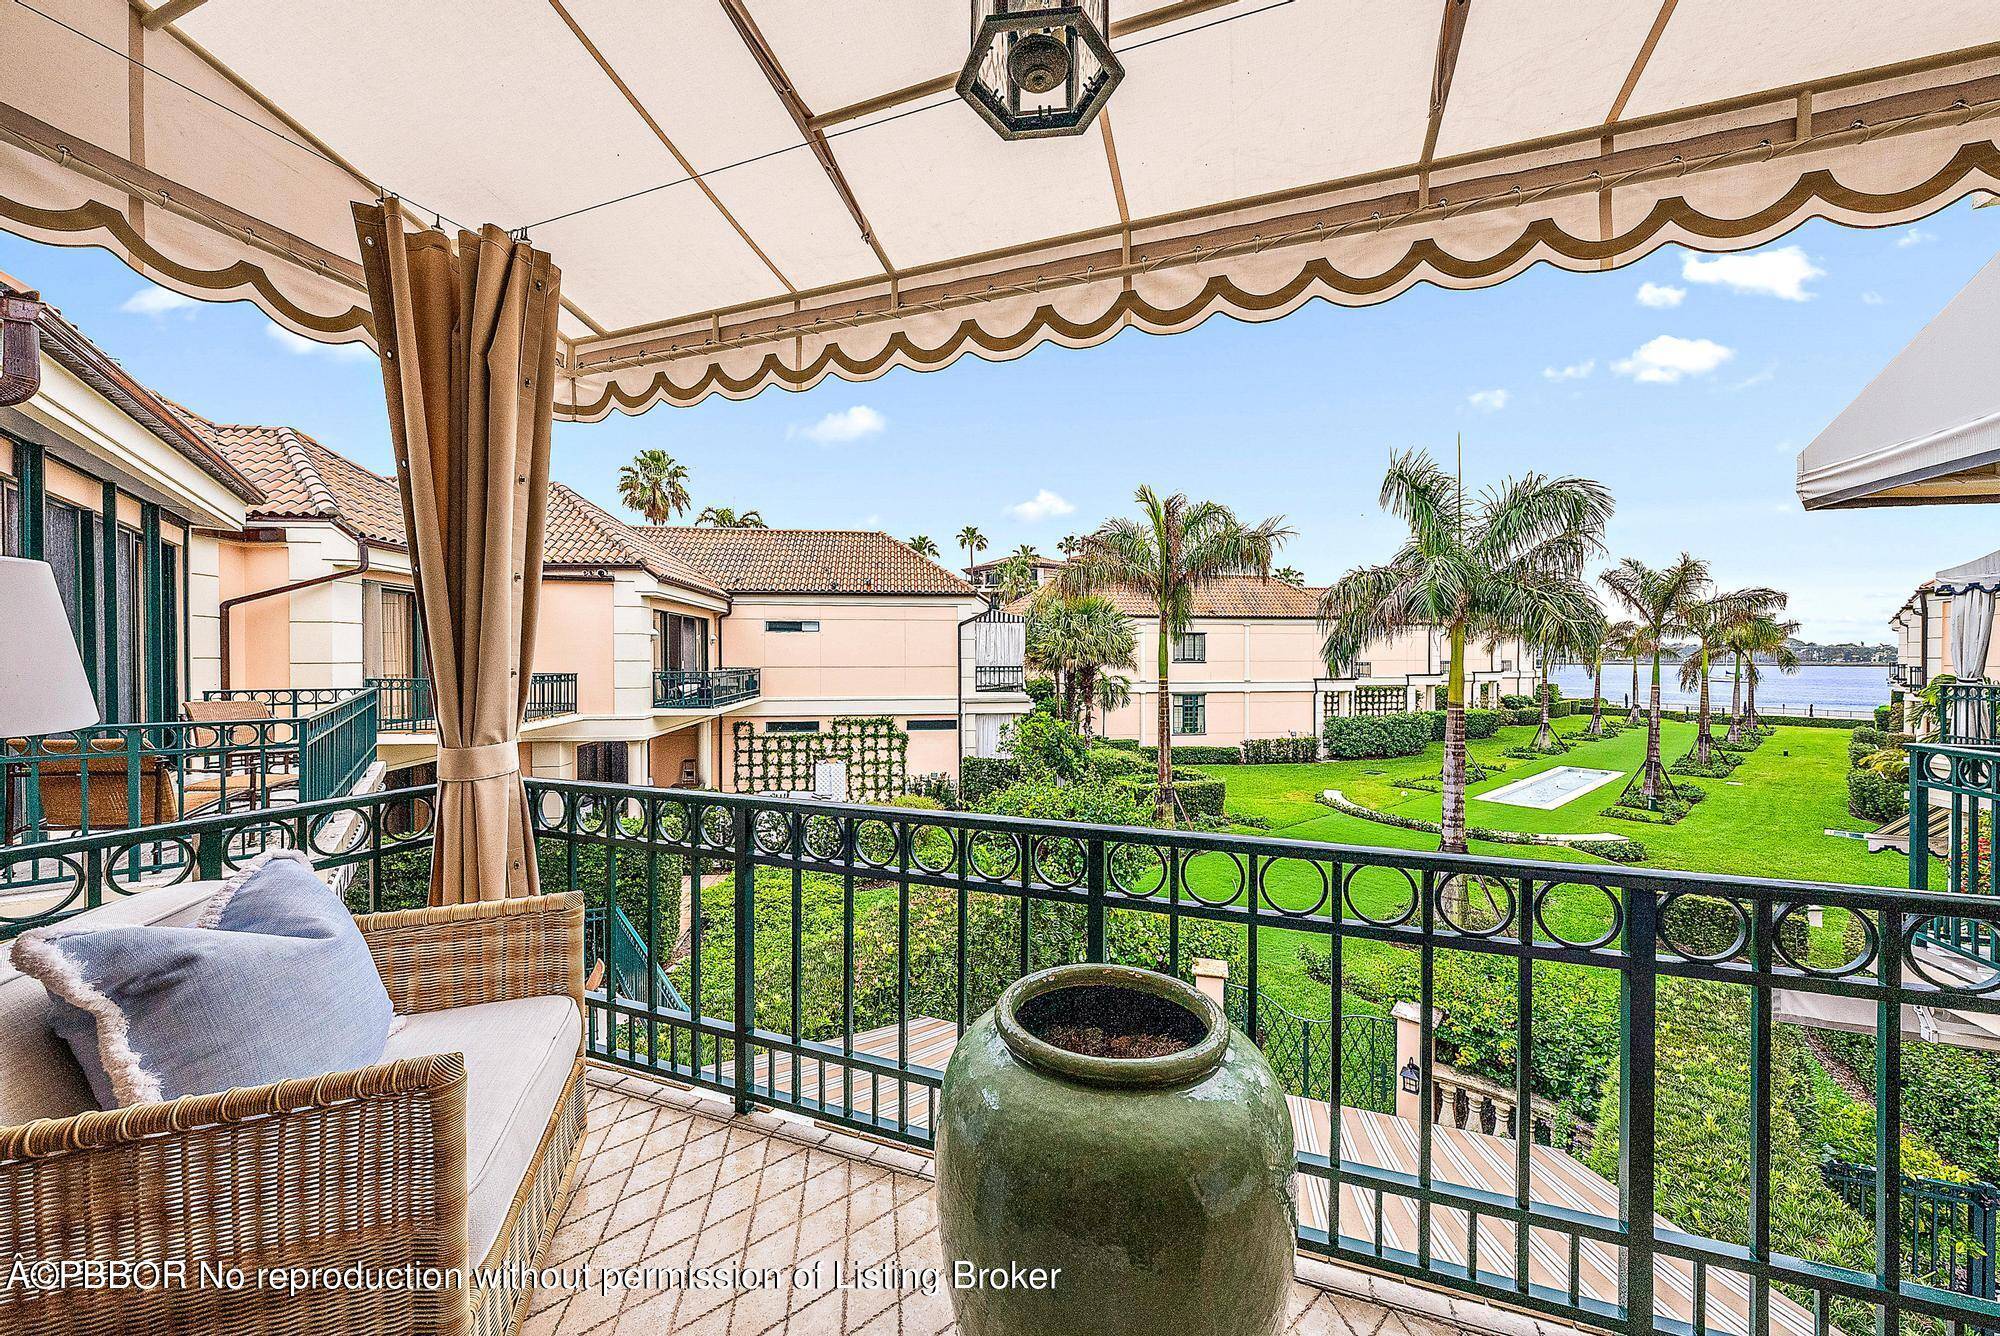 Sublimely located on the Intracoastal Waterway, this beautiful 3 BR, 4.